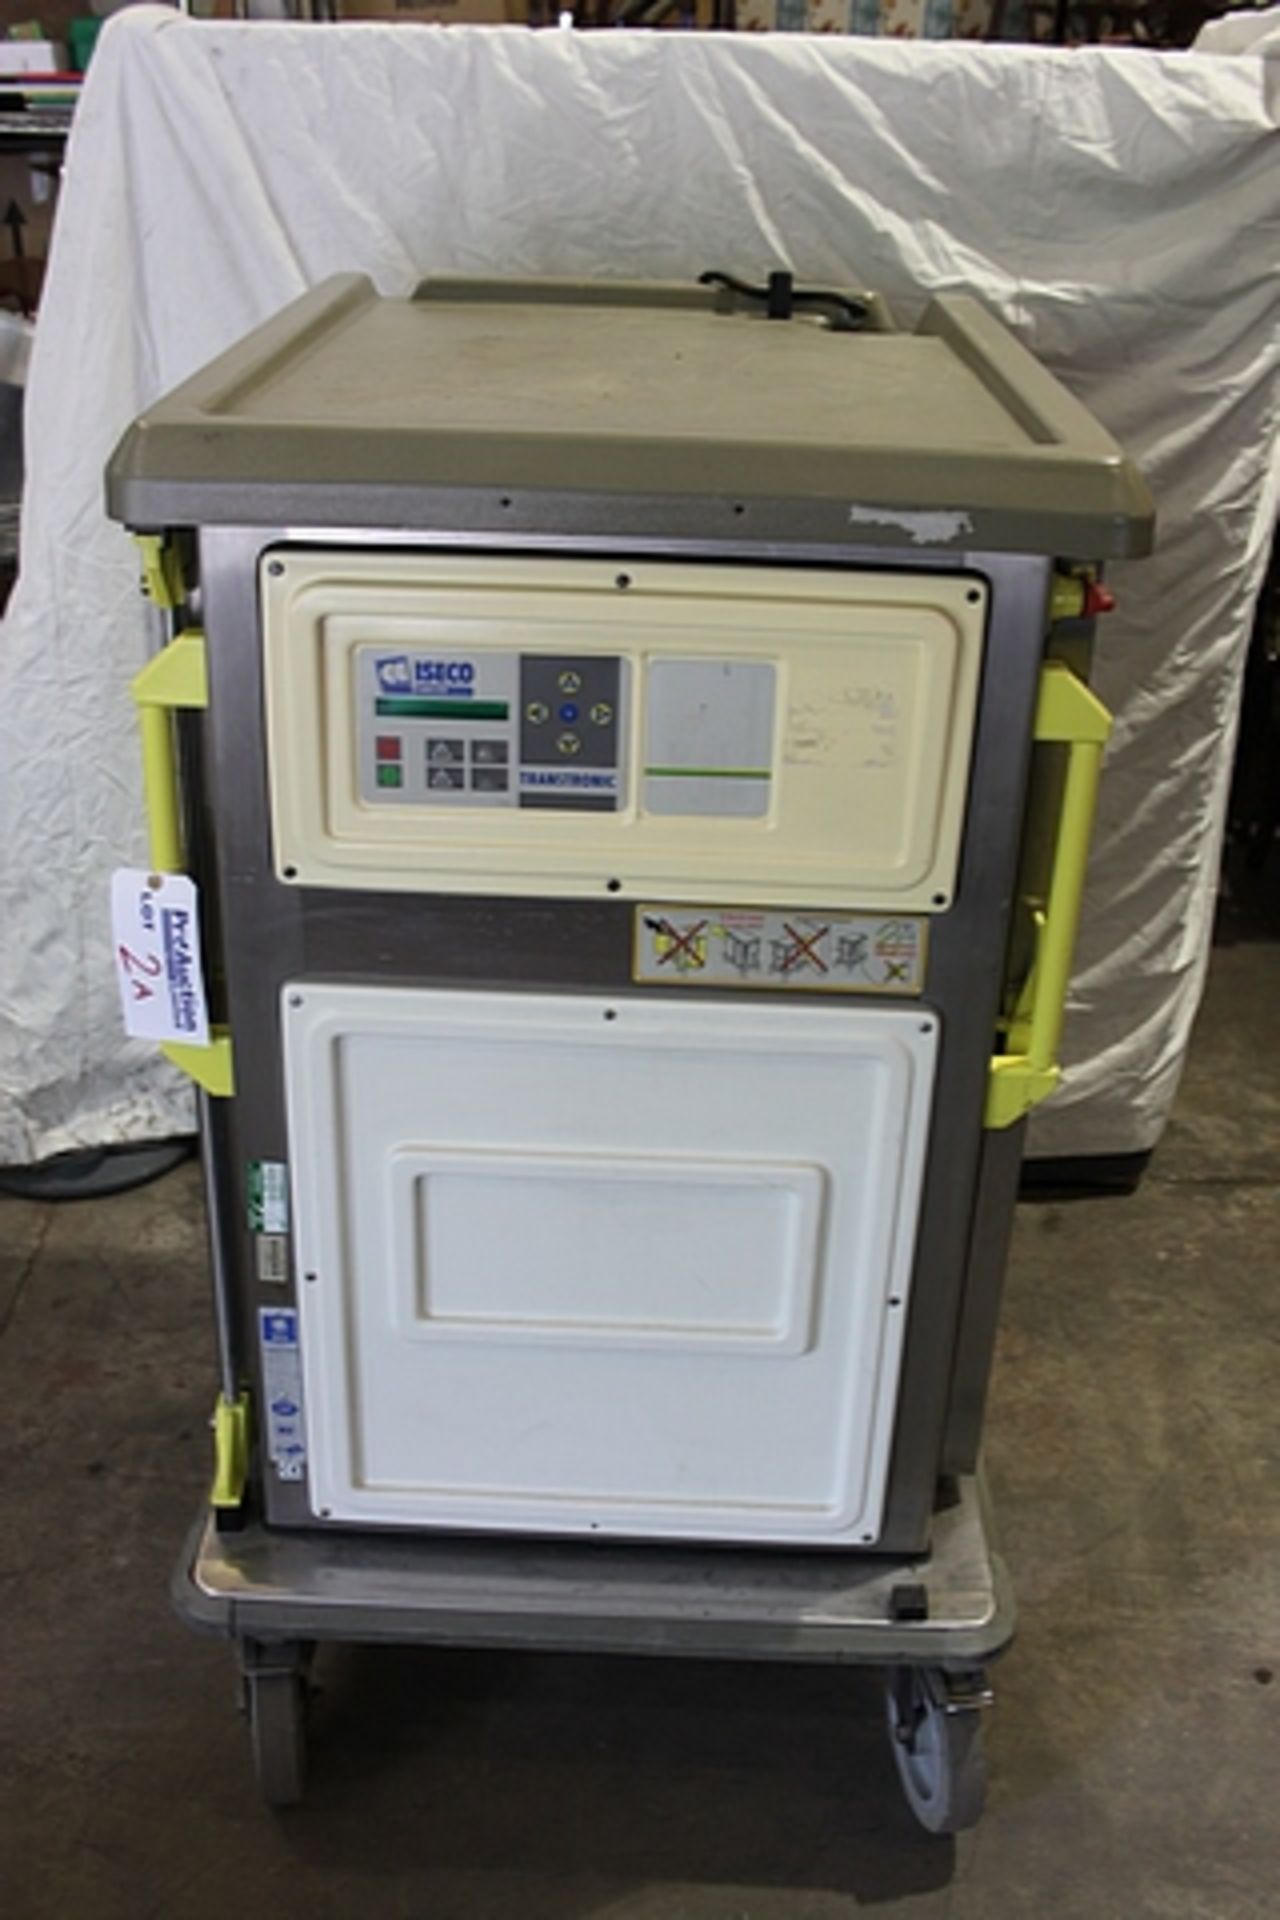 Iseco Cidelcem industries model Transtronic TH30 model cook and hold cabinet